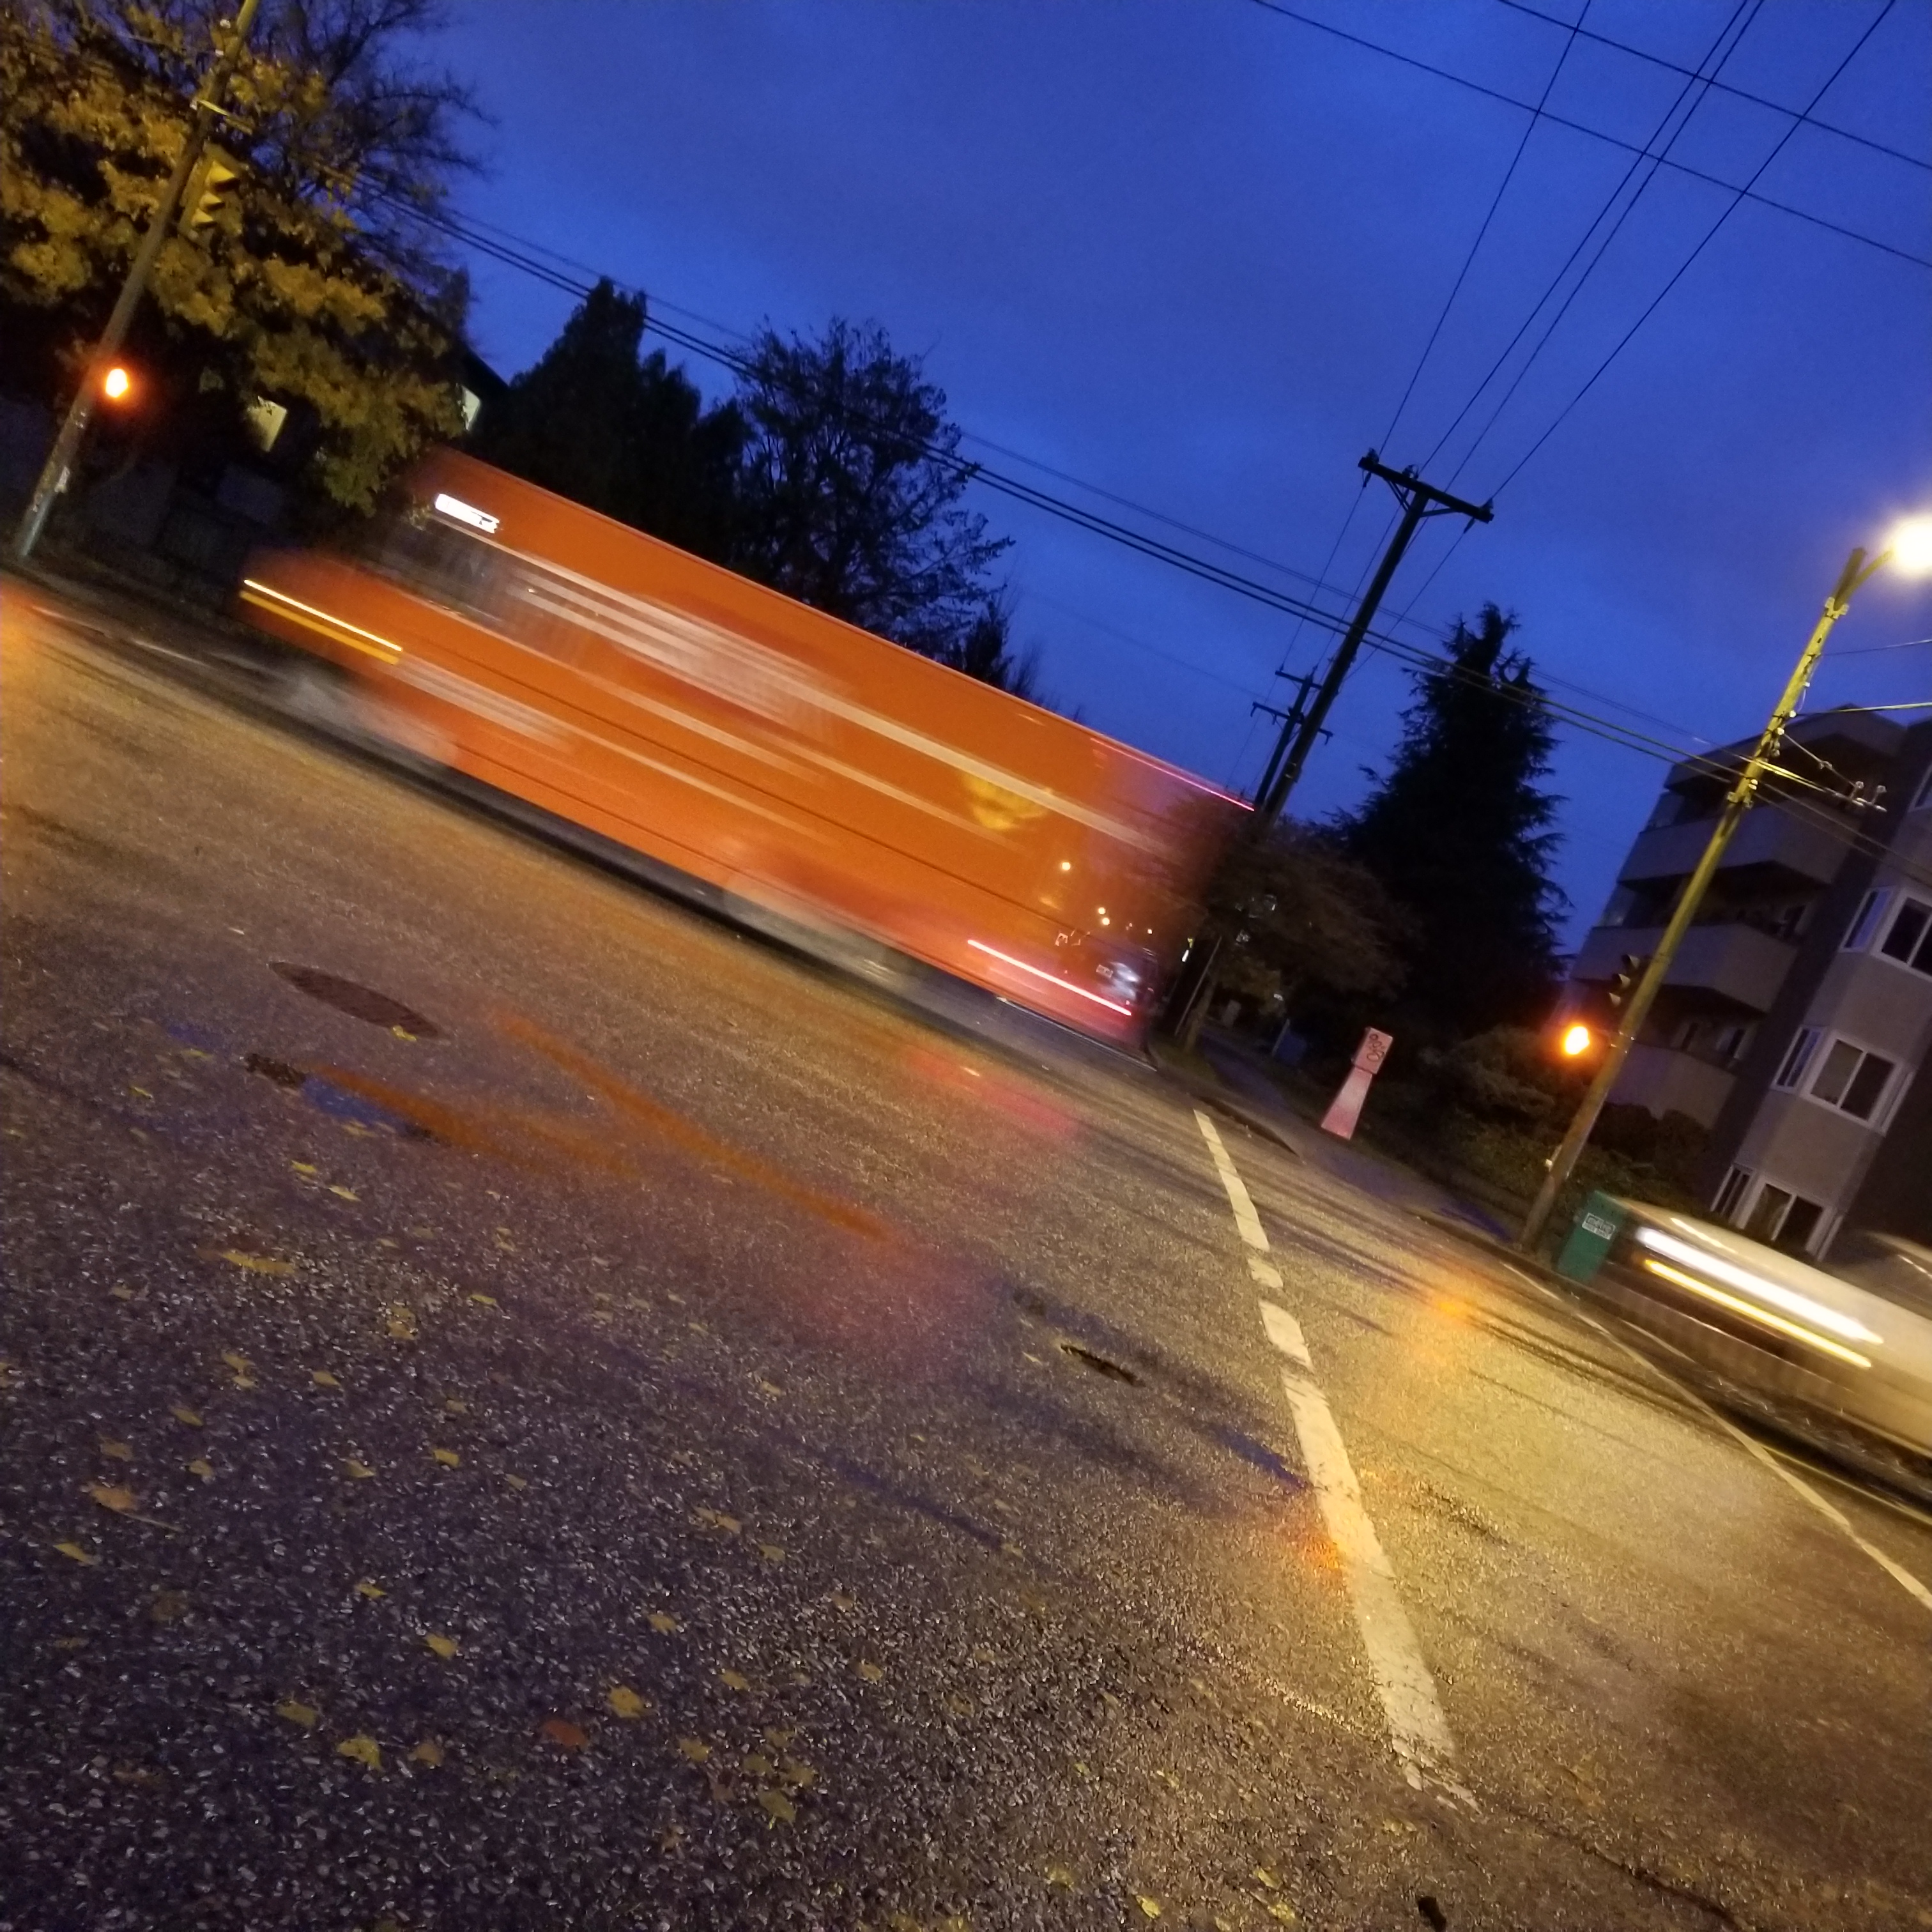 Orange blurry truck on quantum release day is a sign of good luck right :-) ?20171114_065617, Bicyclingtowork, Bike2workpix, Blurry, Commuting, HQ Photo